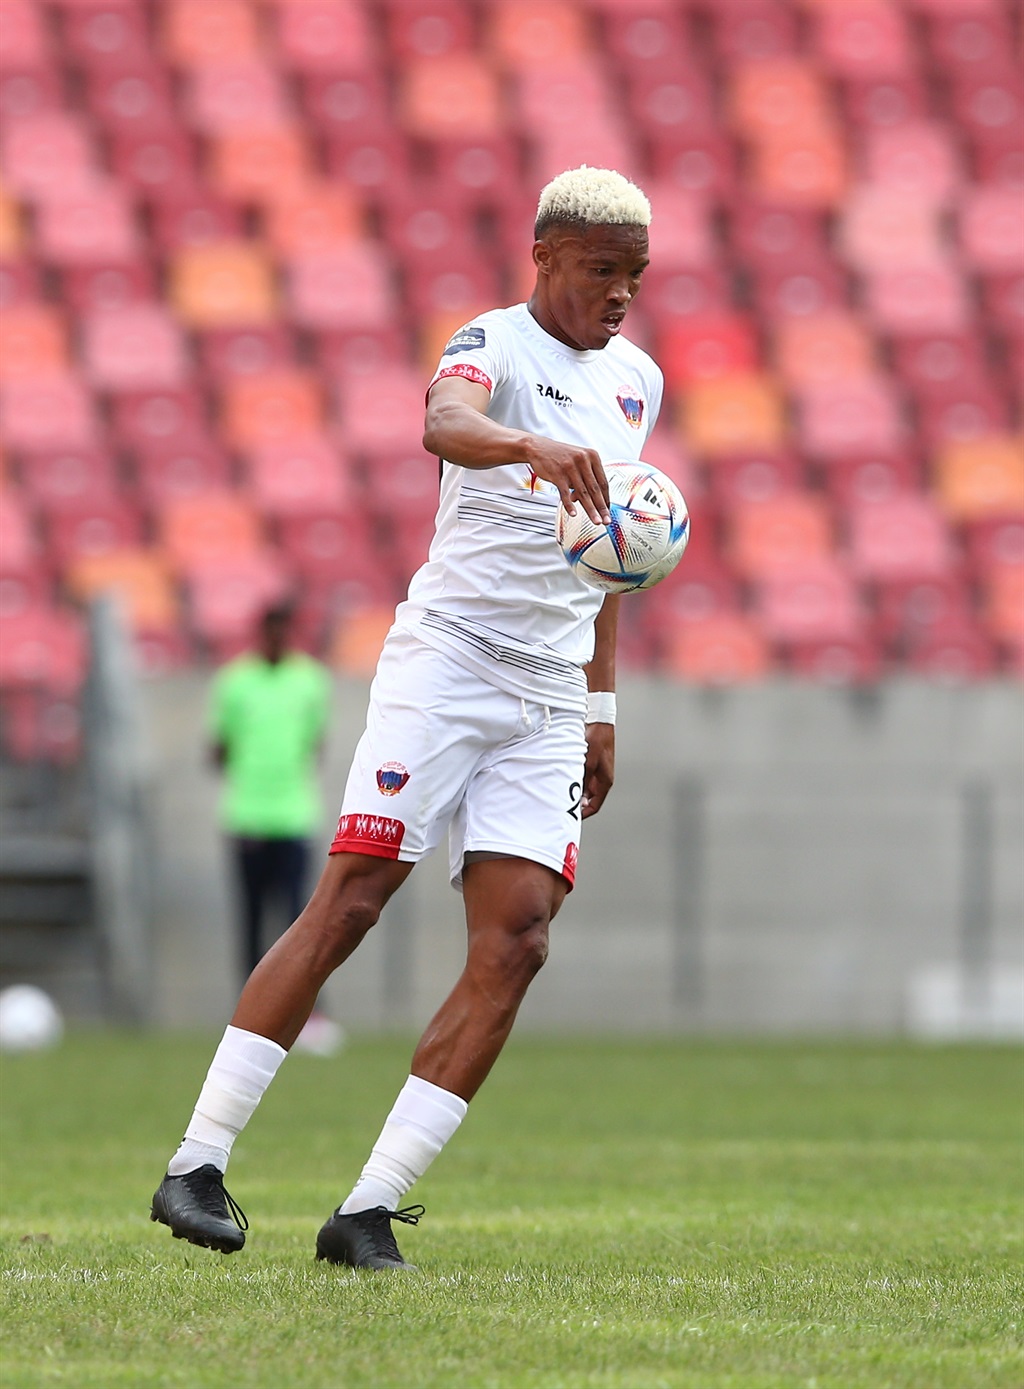 GQEBERHA, SOUTH AFRICA - FEBRUARY 26: Elmo Kambindu of Chippa United during the DStv Premiership match between Chippa United and Swallows FC at Nelson Mandela Bay Stadium on February 26, 2023 in Gqeberha, South Africa. (Photo by Richard Huggard/Gallo Images)